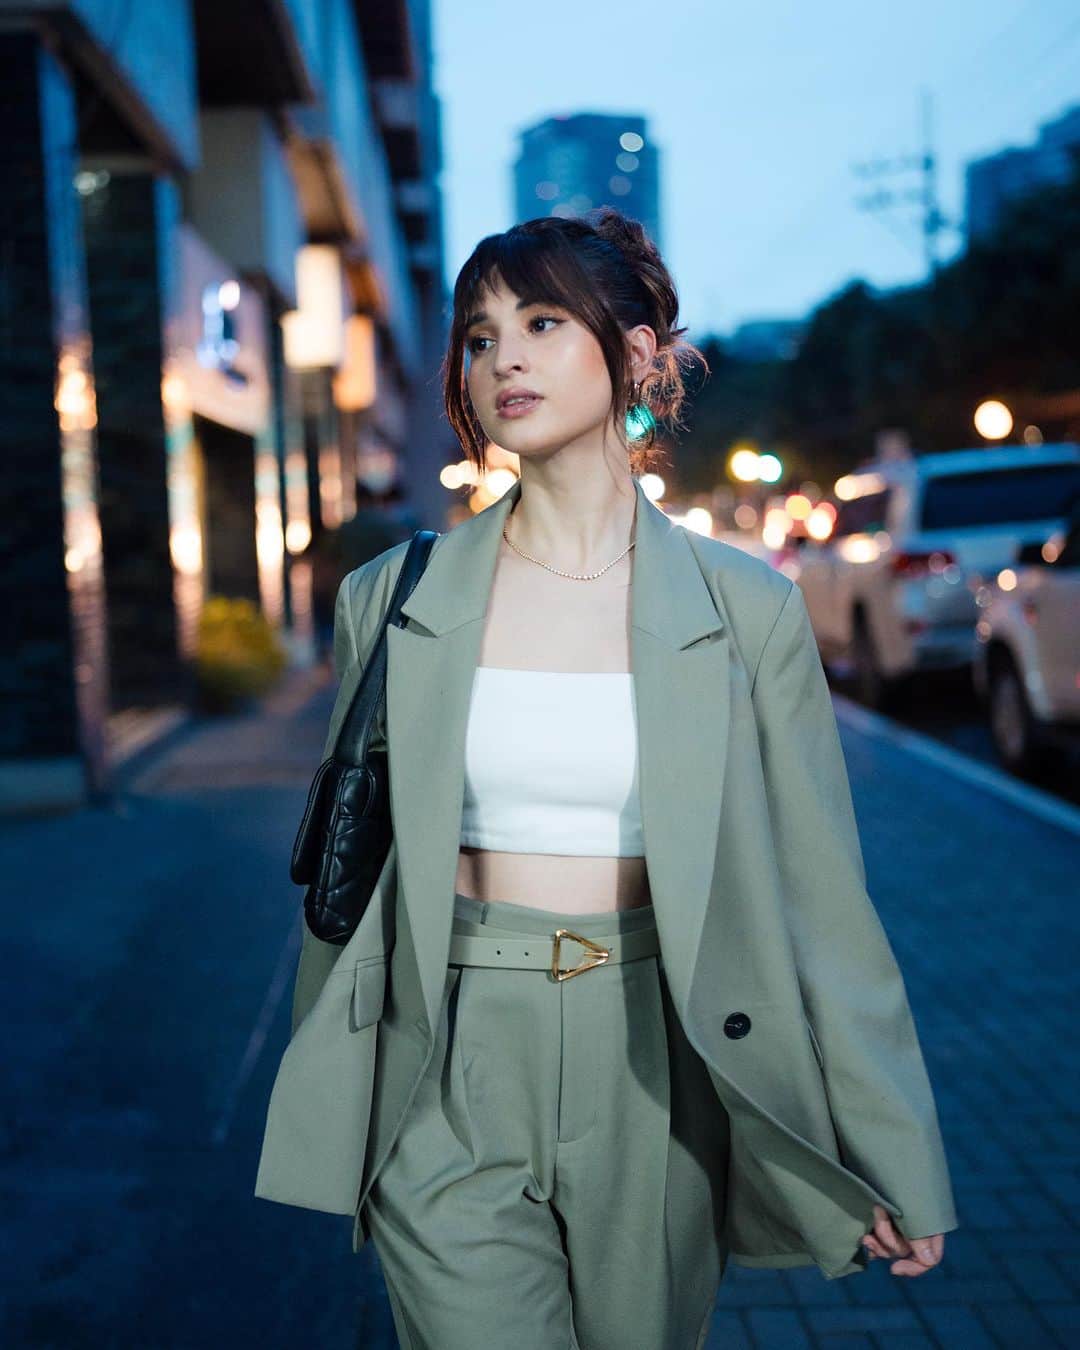 Coleen Garciaのインスタグラム：「The #LBxColeen collection is now available on lovebonito.com! 🥰  Here’s a peek at how I styled the pieces together! I love how versatile and wearable they are for everyday city life! ✨   ○ Gerty Tailored Tie Back Blazer ○ Sela Tailored Peg Leg Pants ○ Larsie Tailored Linen Cropped Shirt ○ Paula Pleather A-line Shorts ○ Sitti Relaxed V-neck Blazer ○ Wyatt Cotton Oversized Button Down Shirt ○ Zenith Batwing Knit Cardigan ○ Bradie Denim Flare Jeans ○ Thalie Tailored Wide Leg Pants  Which one’s your favorite? 😍 #LBxColeen #welovebonitoPH」